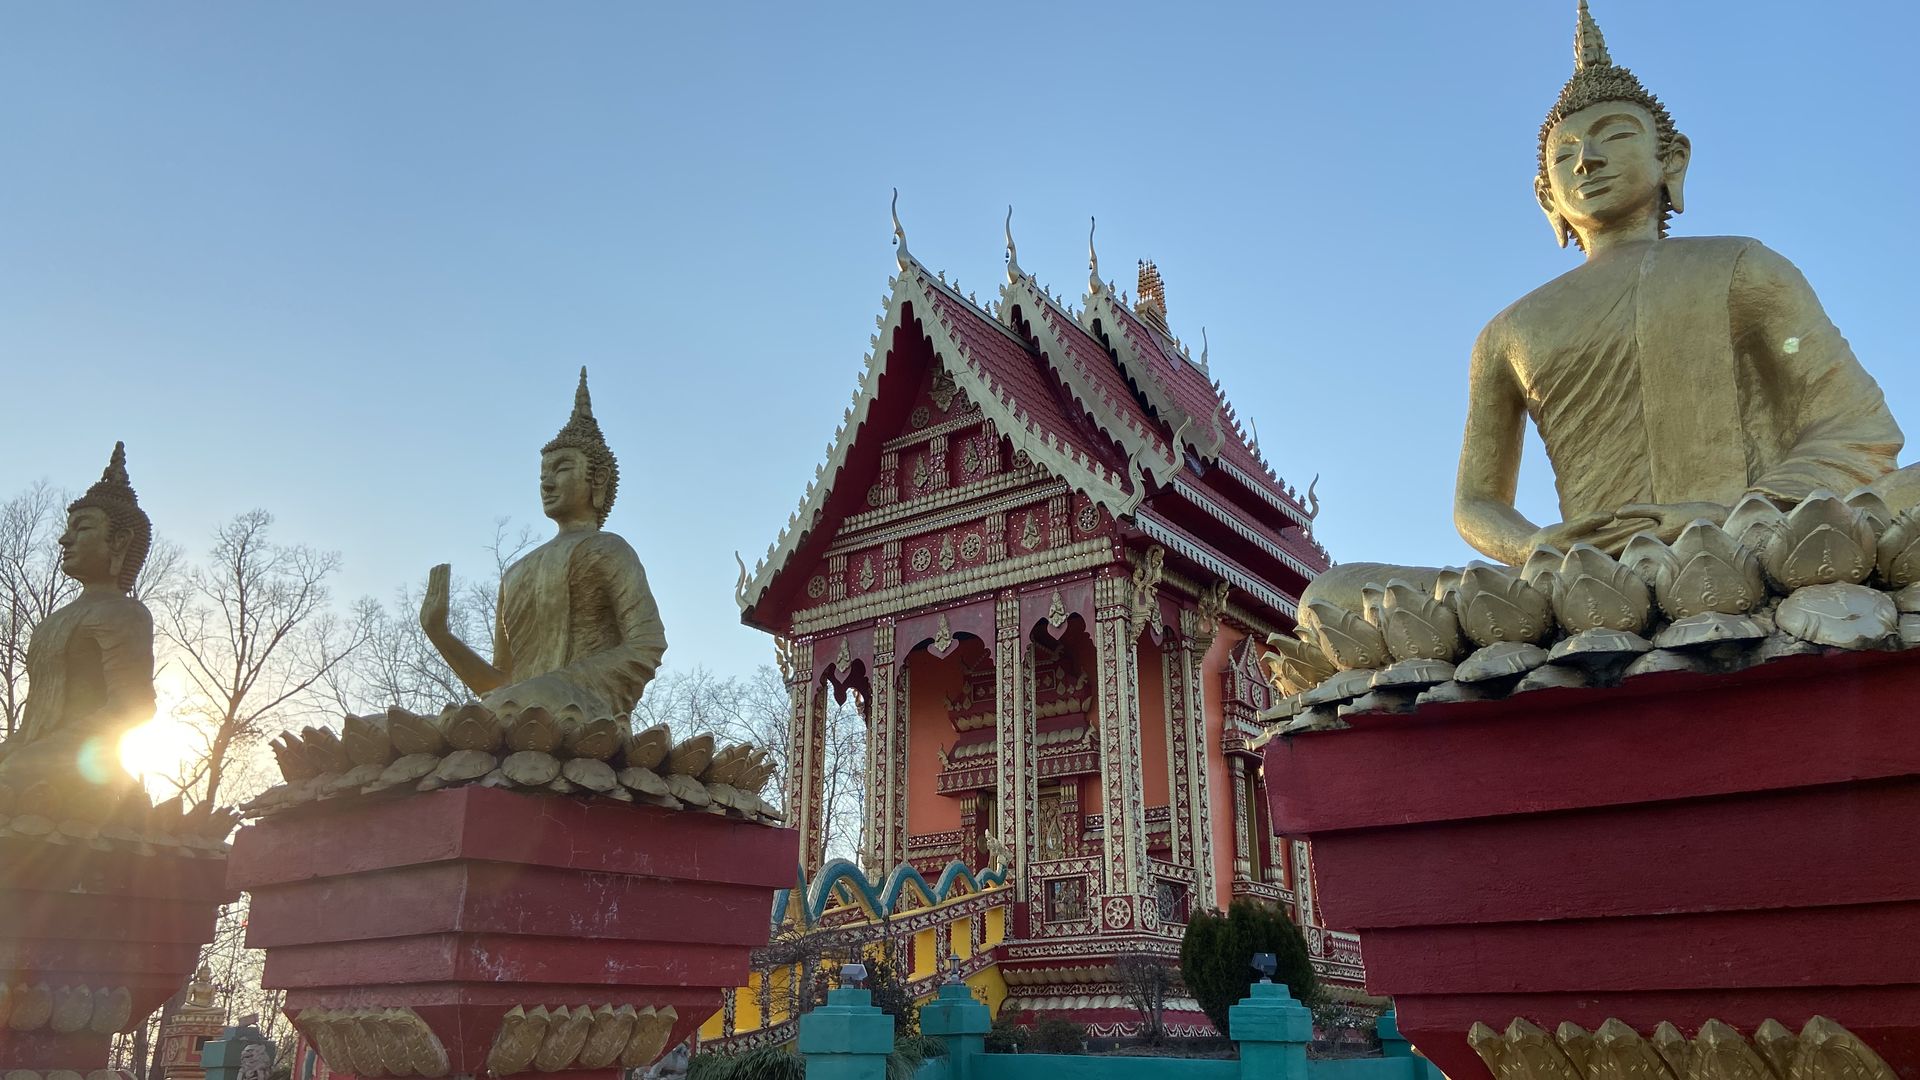 A vibrantly colored Buddhist temple with statues outside during a winter sunset